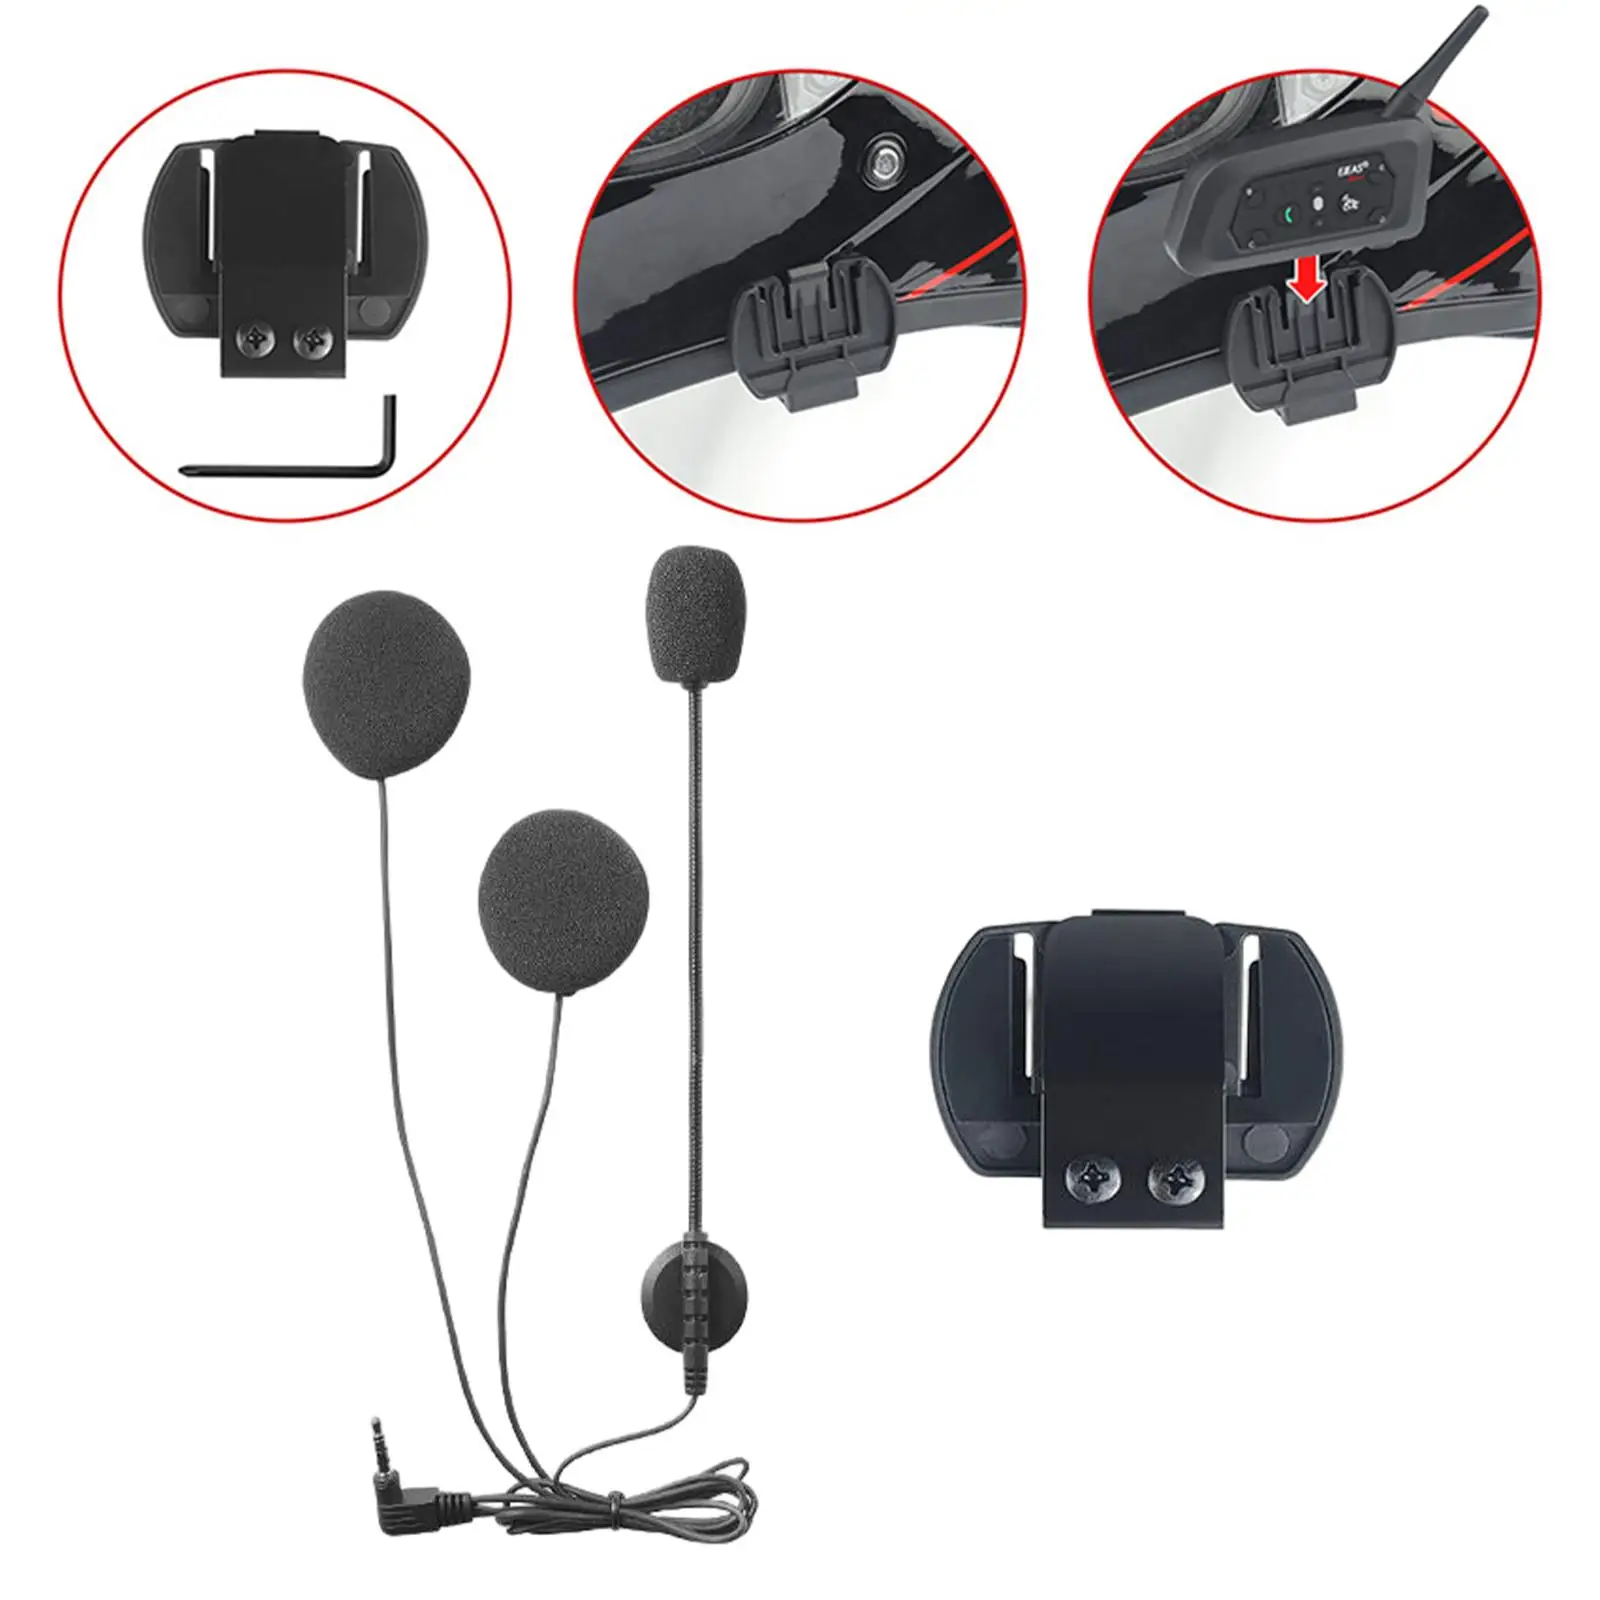 Universal Motorcycle Helmet Intercom Stable Useful Earphone Headsets with Microphone Motorcycle Helmet for V4 V6 Outside Riding